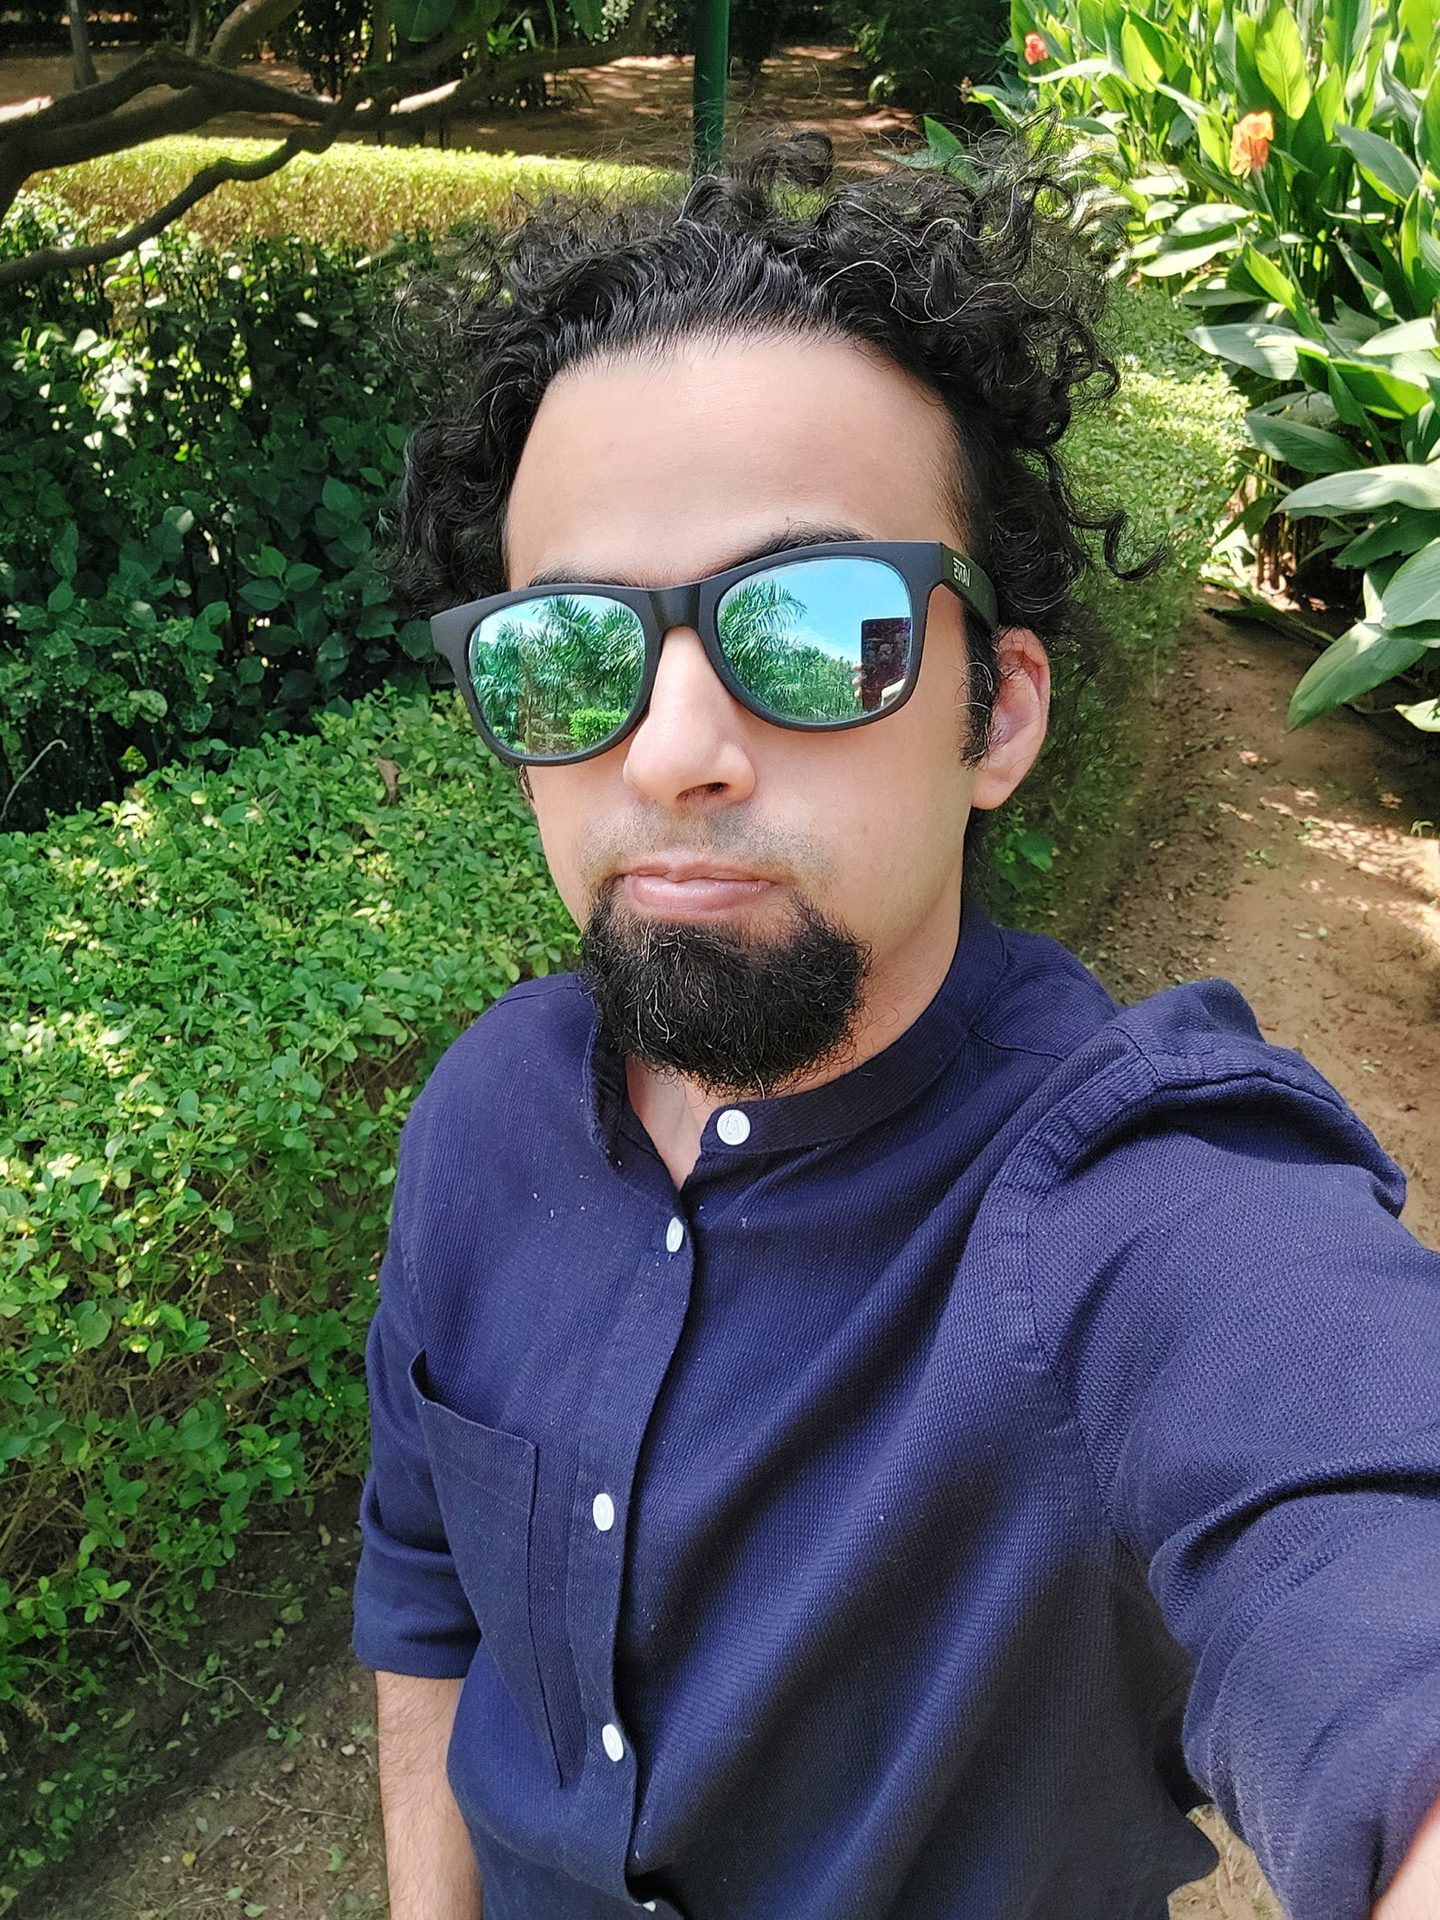 Samsung Galaxy A52s 5G selfie camera standard shot of man with dark hair and beard wearing a blue long-sleeve shirt and mirrored shades, taken outdoors next to a green hedge.